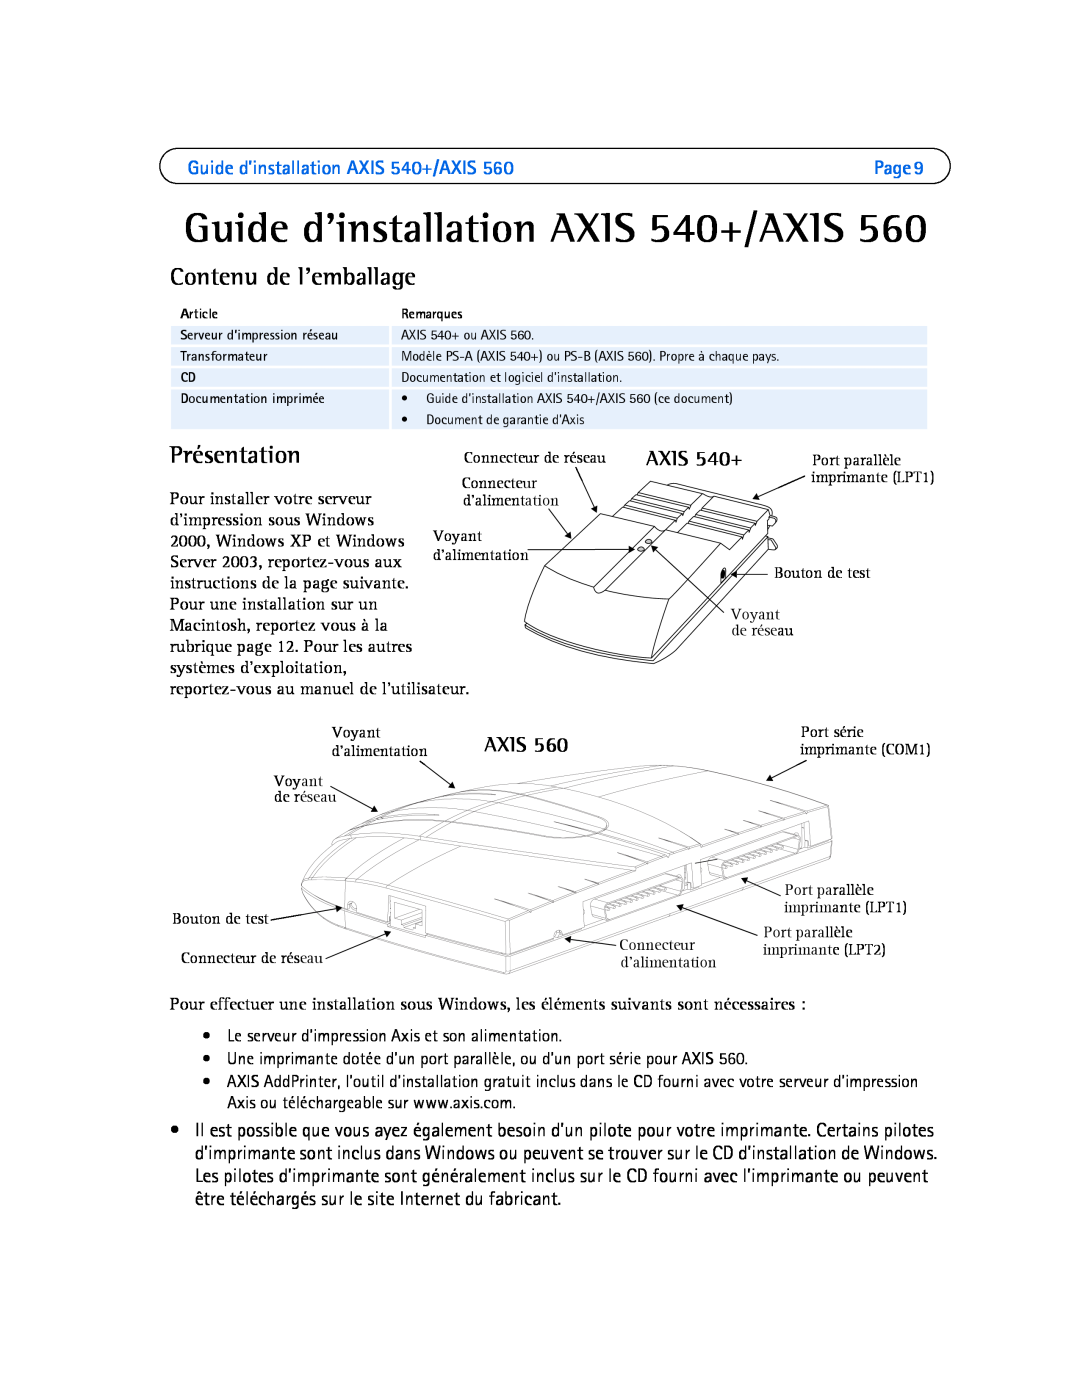 Axis Communications 560 manual Guide d’installation AXIS 540+/AXIS, Contenu de l’emballage, Présentation, Axis 